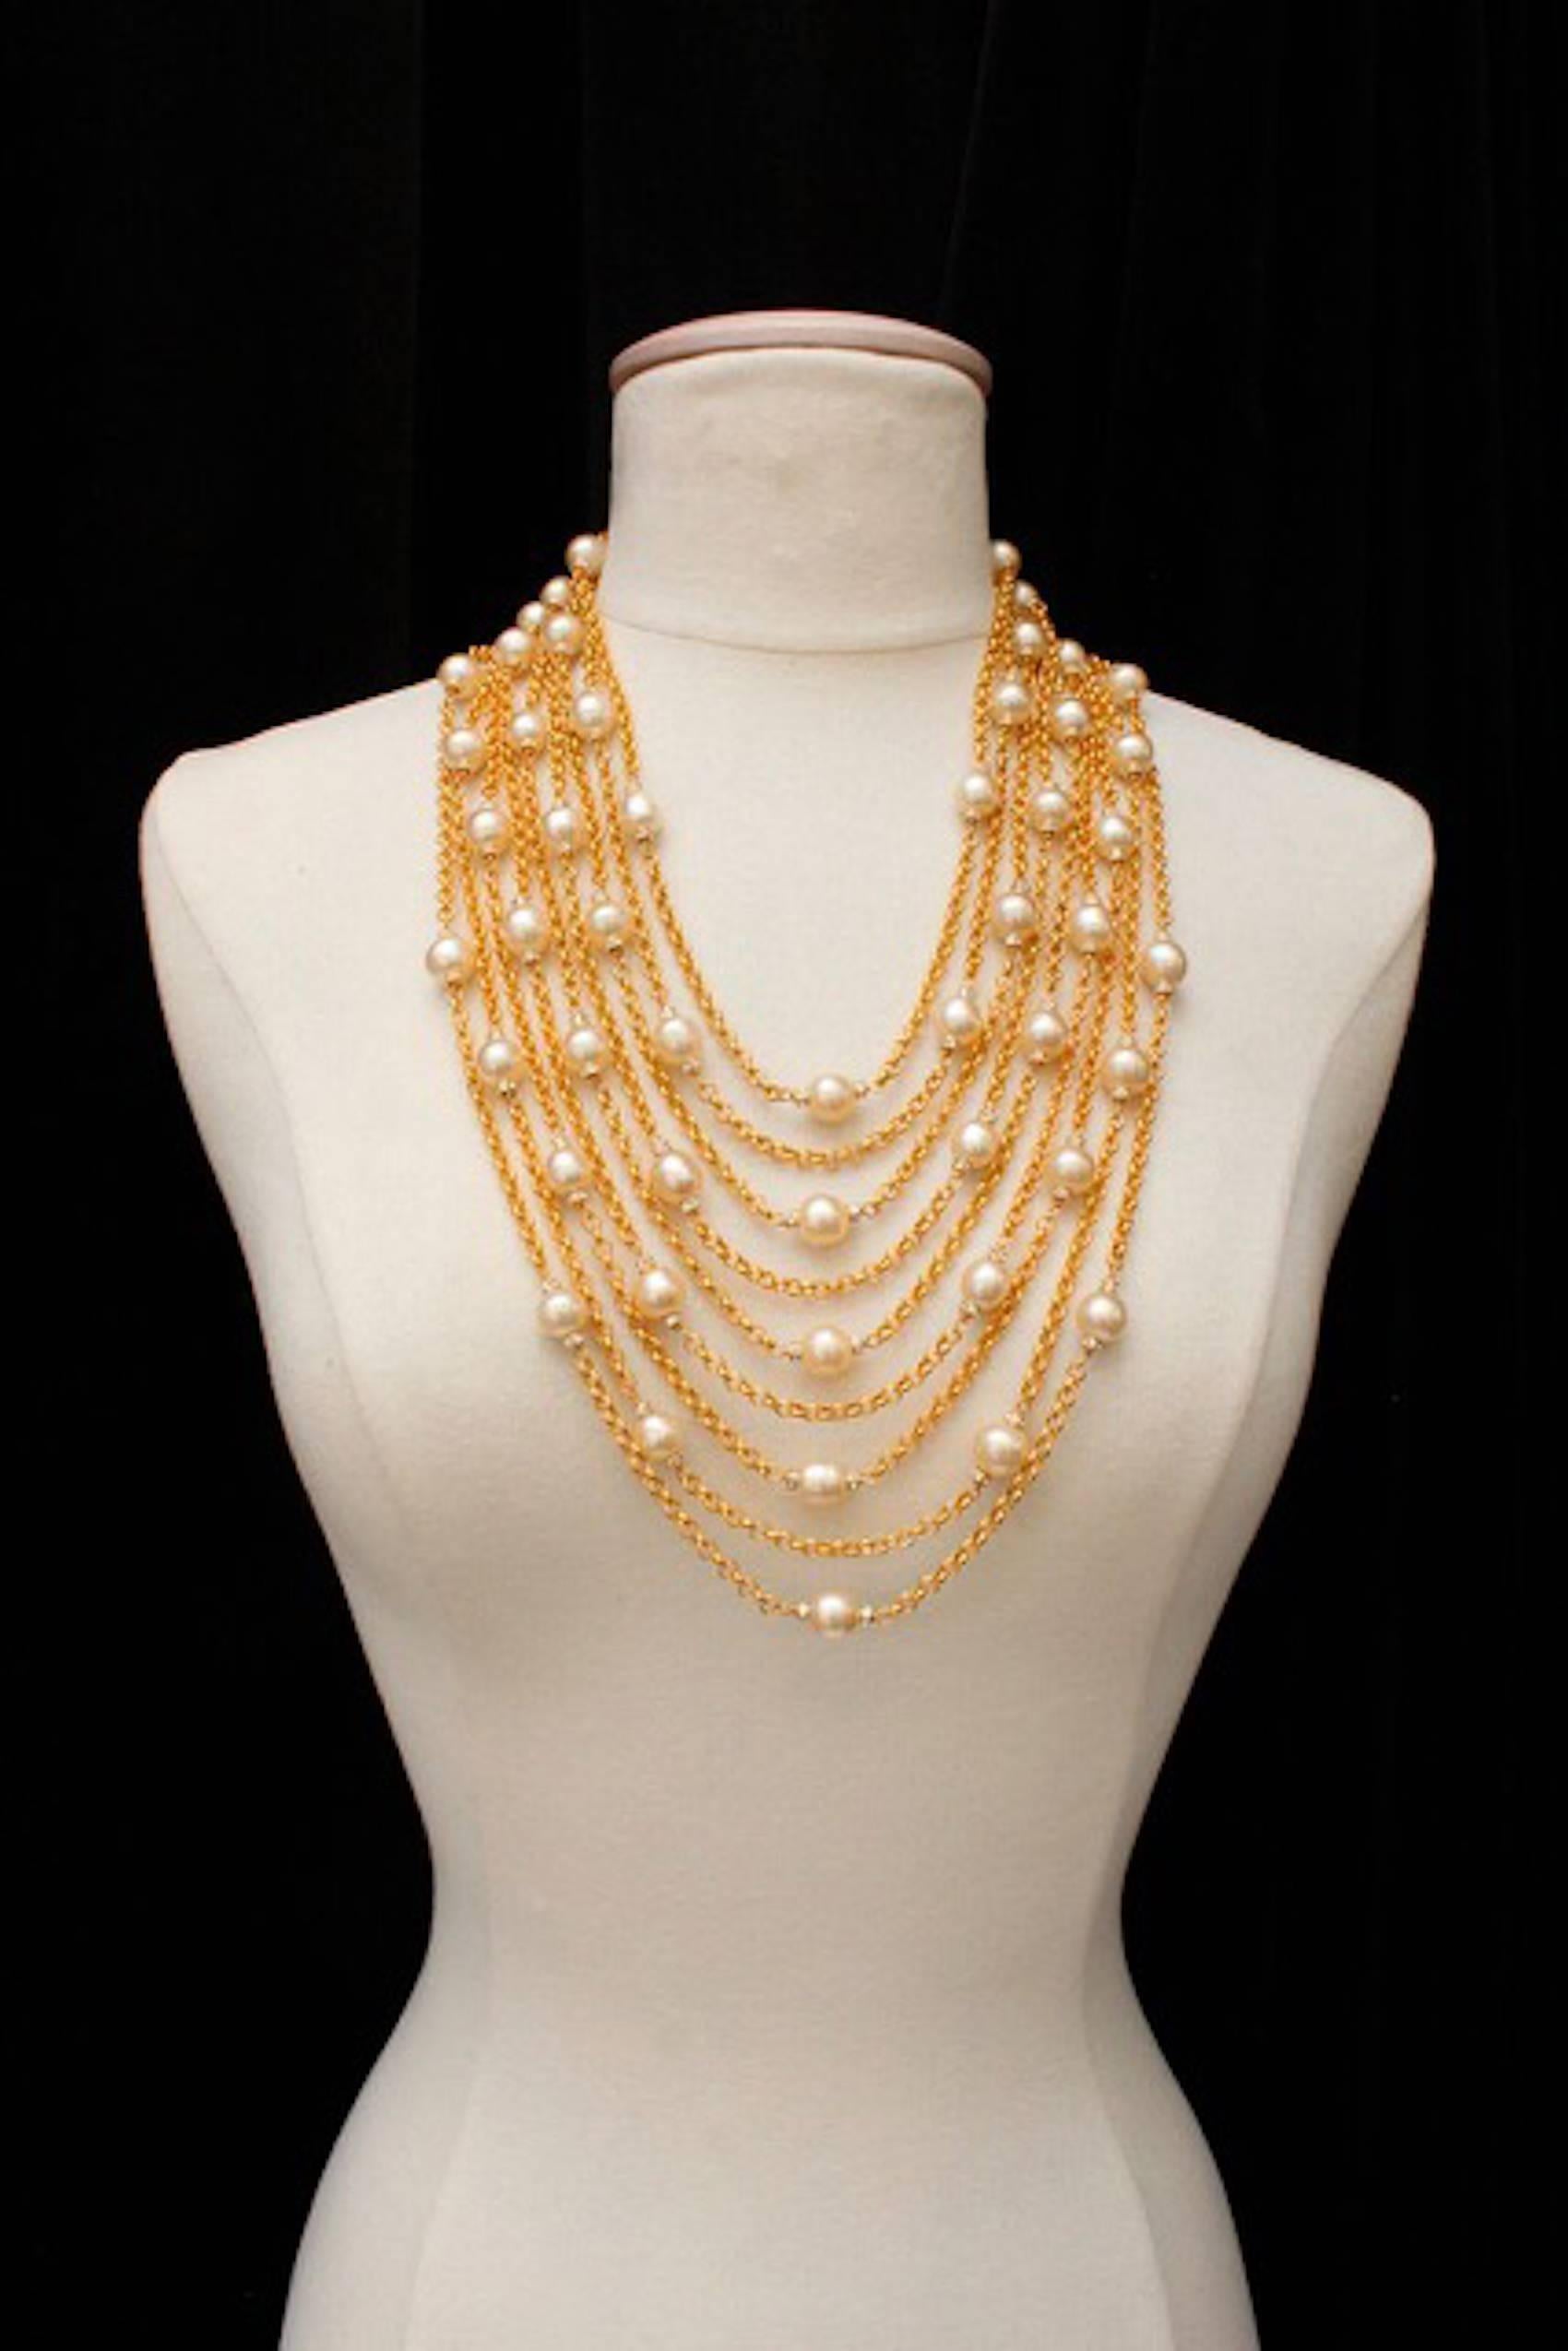 Vintage Chanel 9-stranded gold tone rolo chain, pearl and crystal encrusted rondelle necklace. In excellent condition - stamped Chanel.
shortest drop - 11"
longest - 15" 